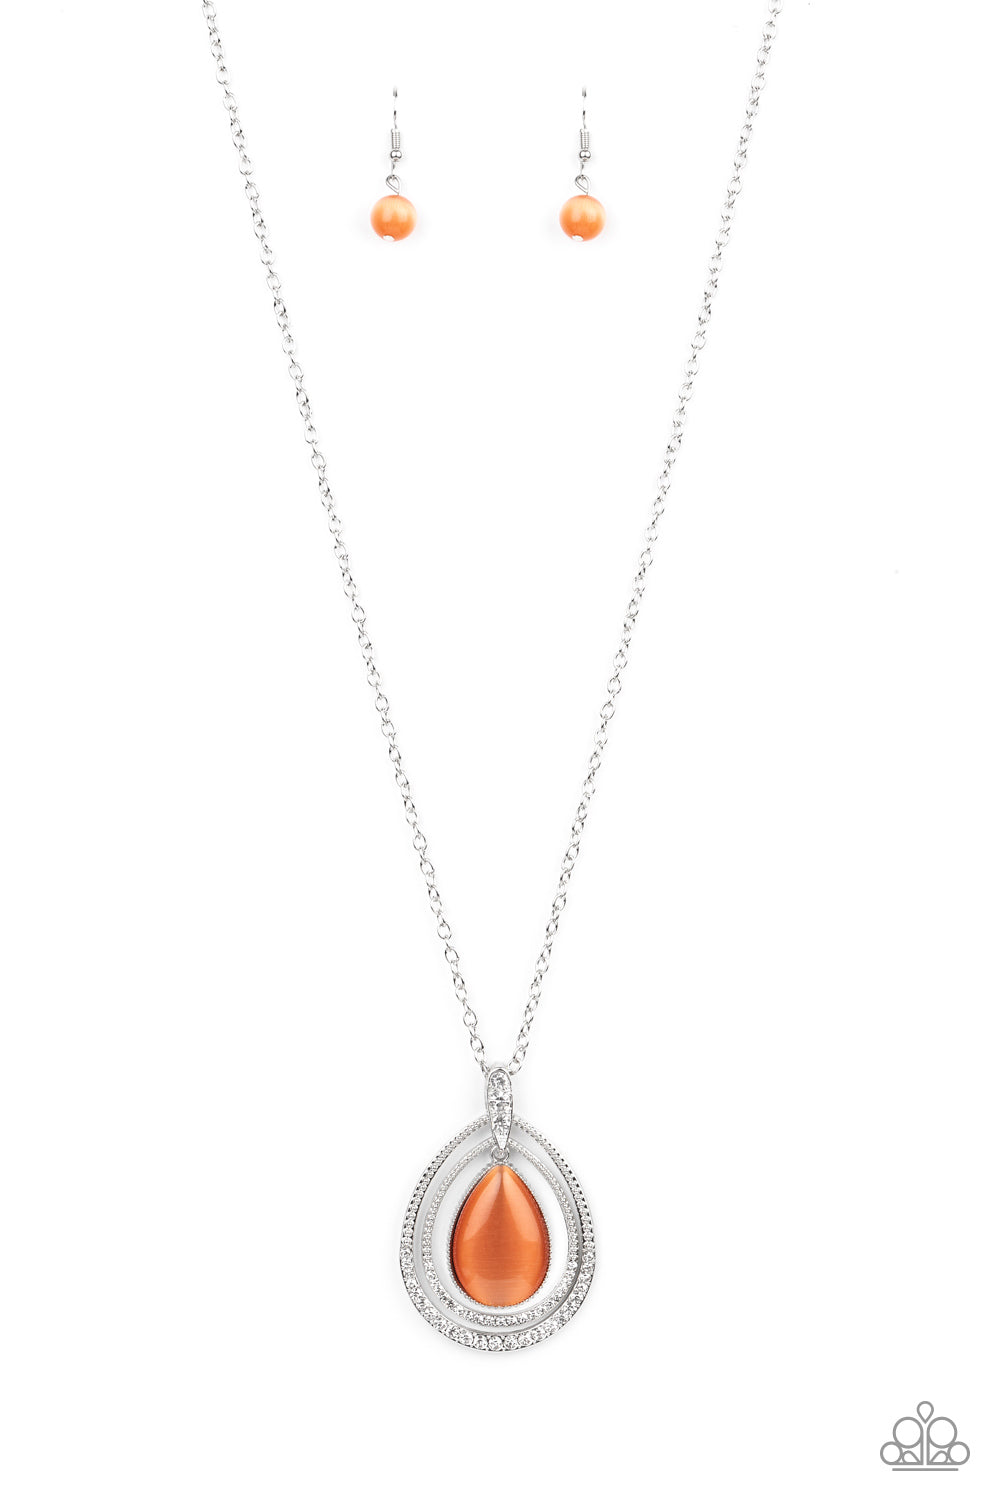 GLOW and Tell Necklace__Orange